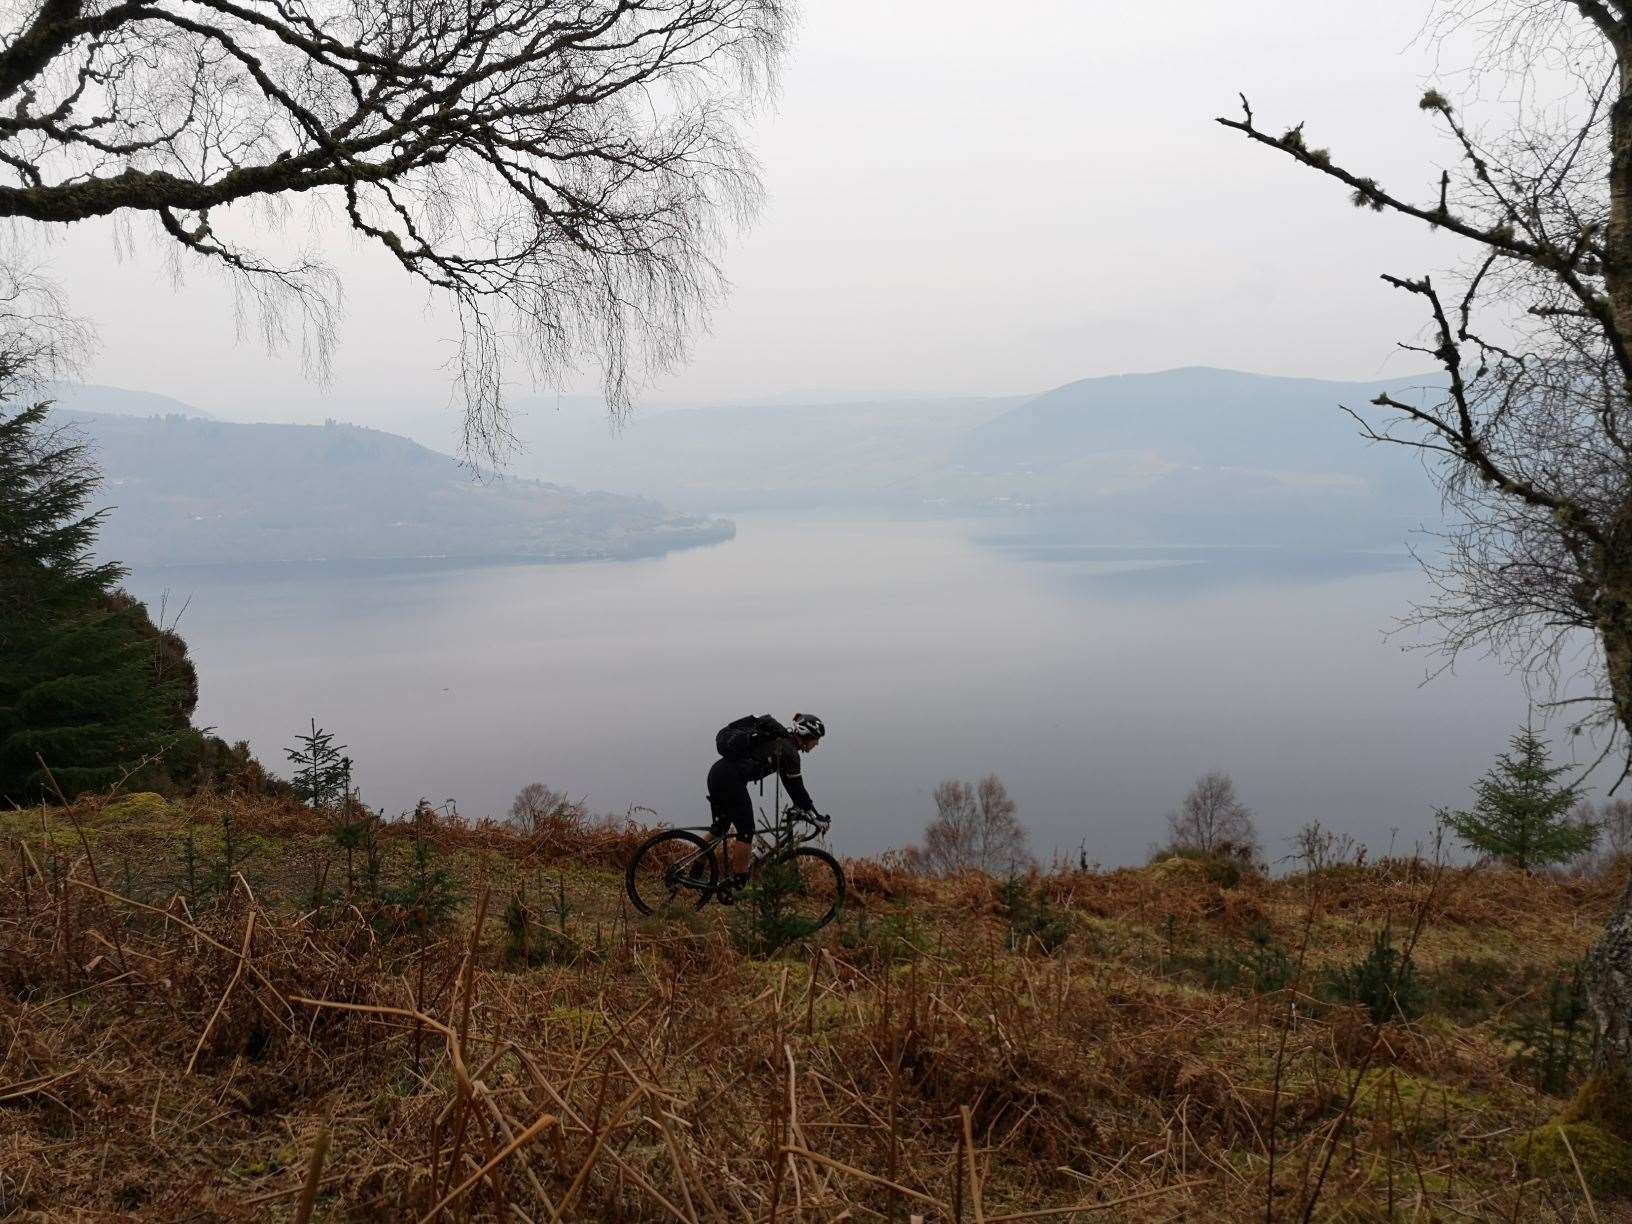 The Loch Ness 360 Challenge will now take place on May 28-30 next year.